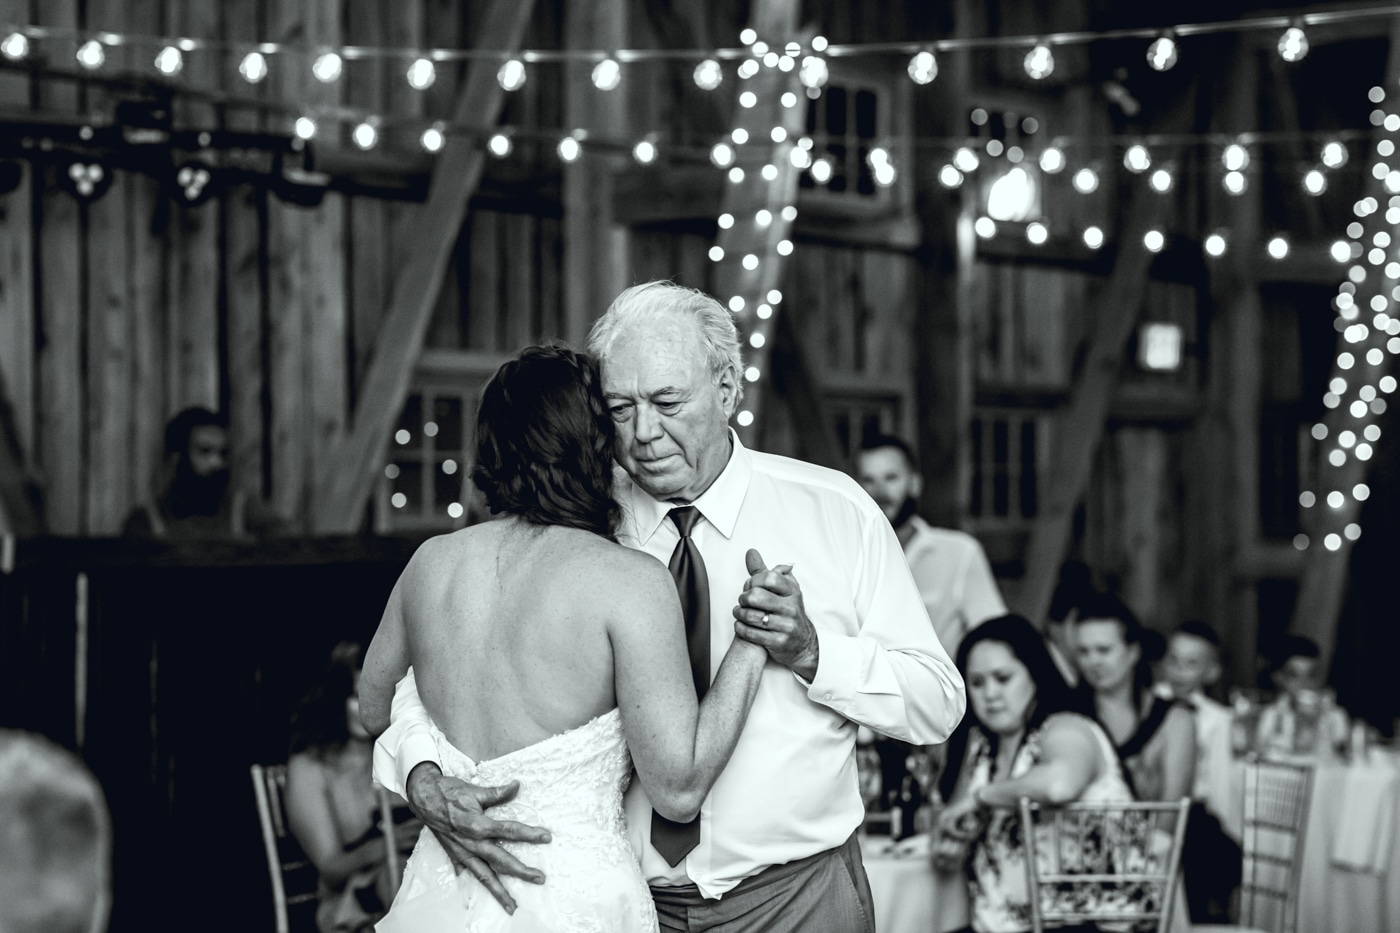 Father and daughter dance and reception black and white